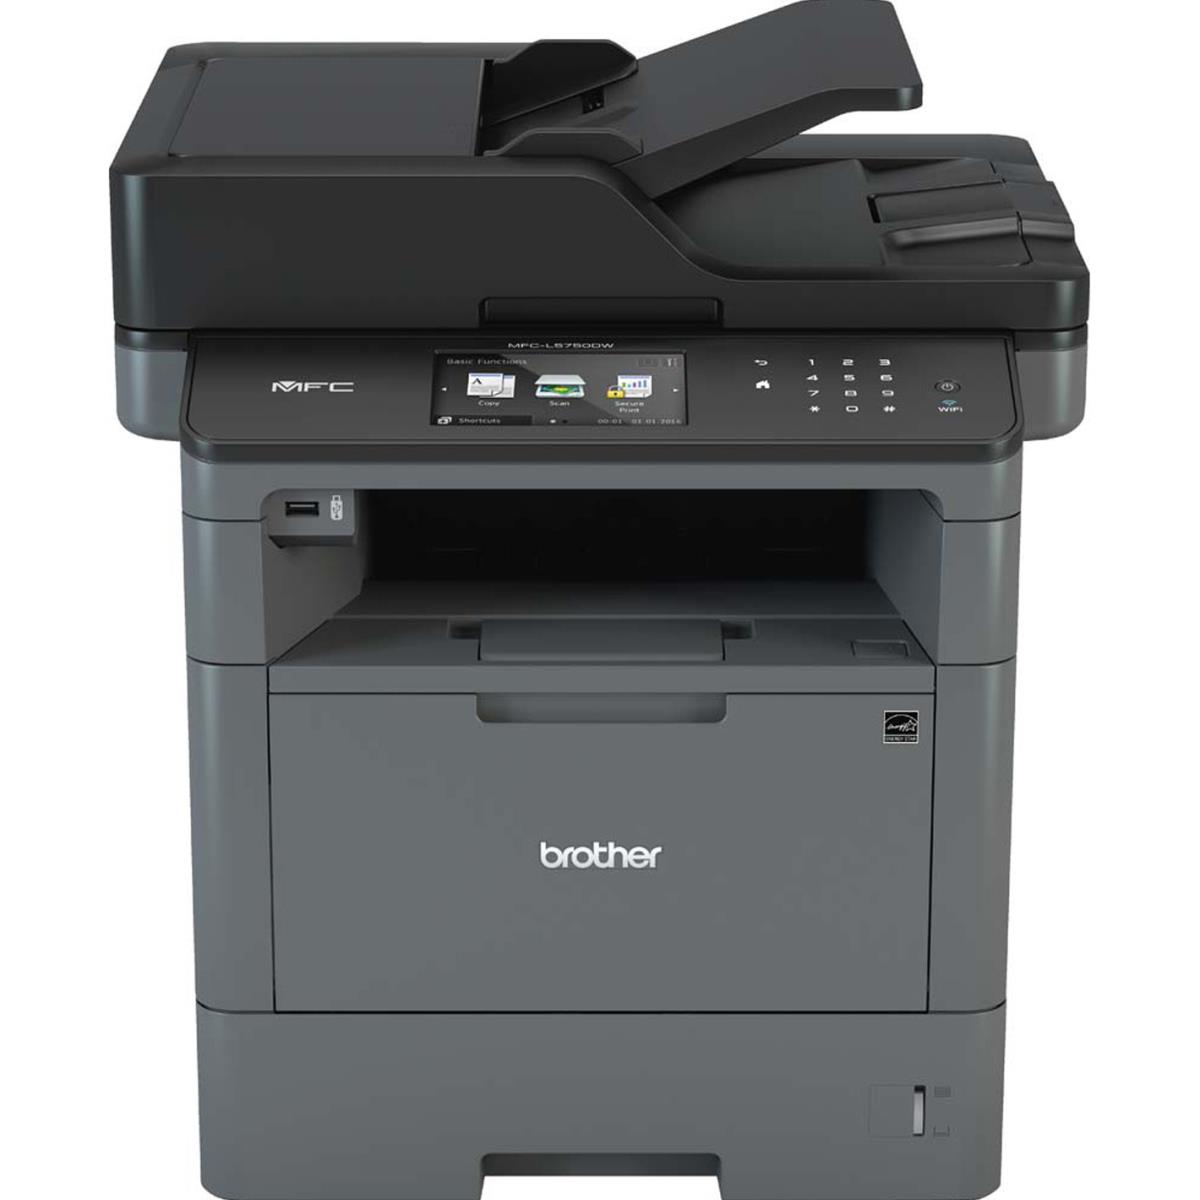 BROTHER Mfc-l5750dw - Multi Function Printer - Laser - A4 - USB